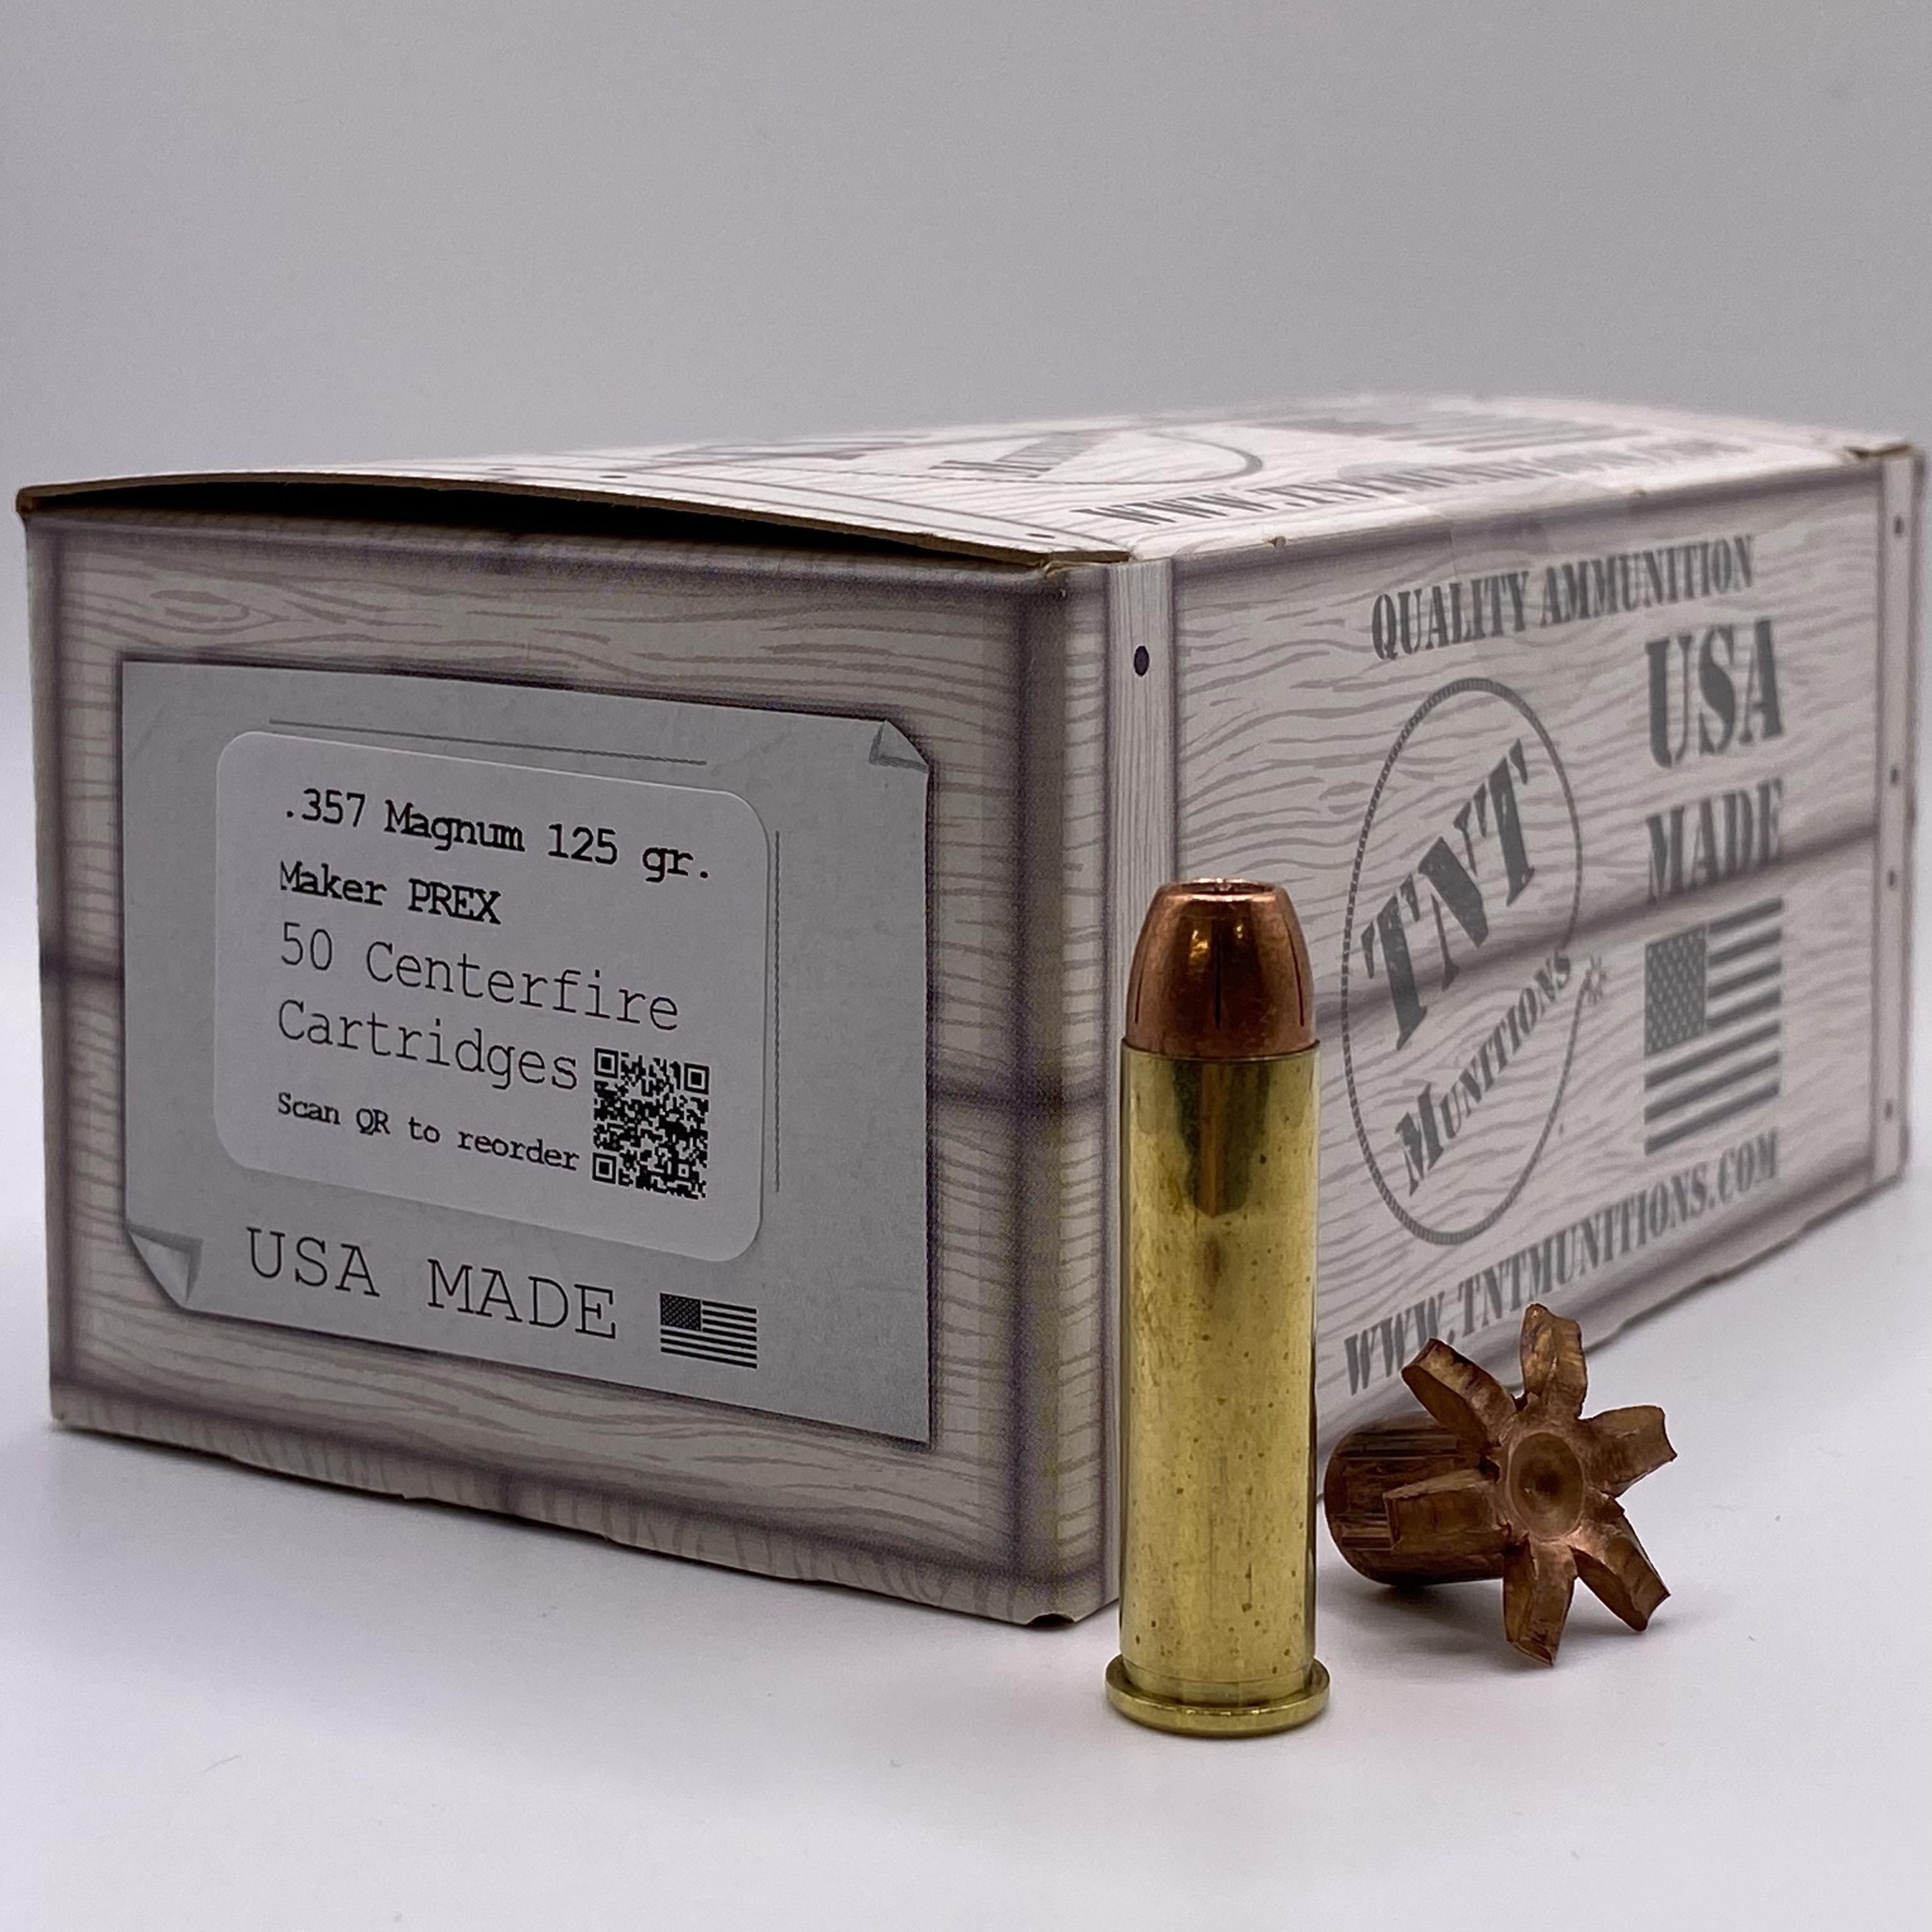 .357 Magnum 125 gr. Maker P-REX. MEMORIAL DAY SALE! THROUGH MAY 29TH ONLY - SHIPS NBD  - (LEAD-FREE)